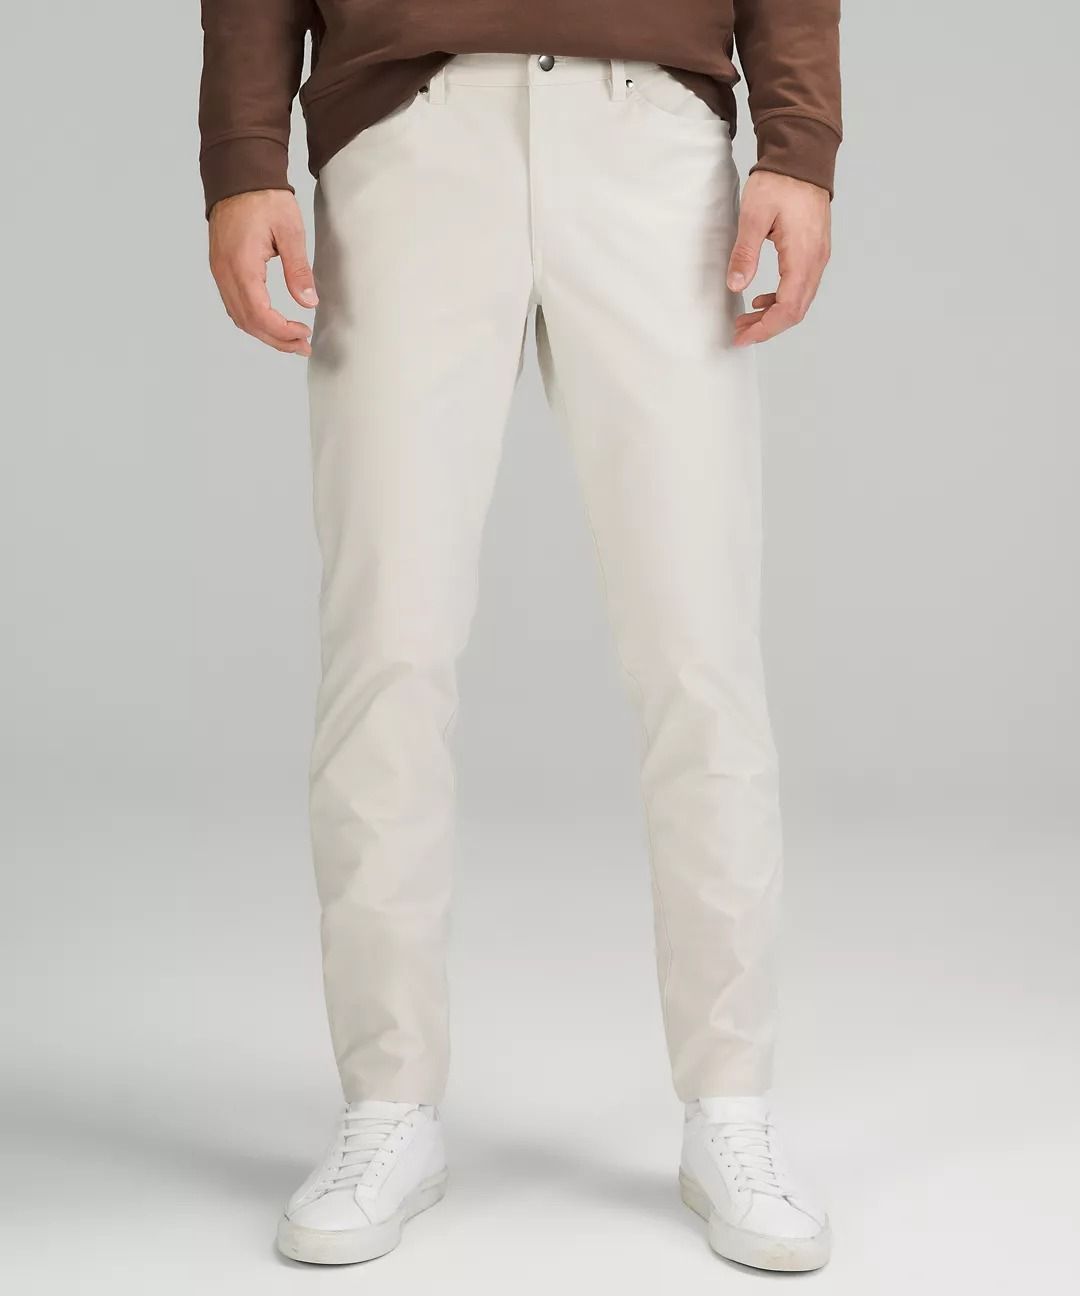 24 Best Mens Pants You Should Be Wearing in 2023  Dapper Confidential